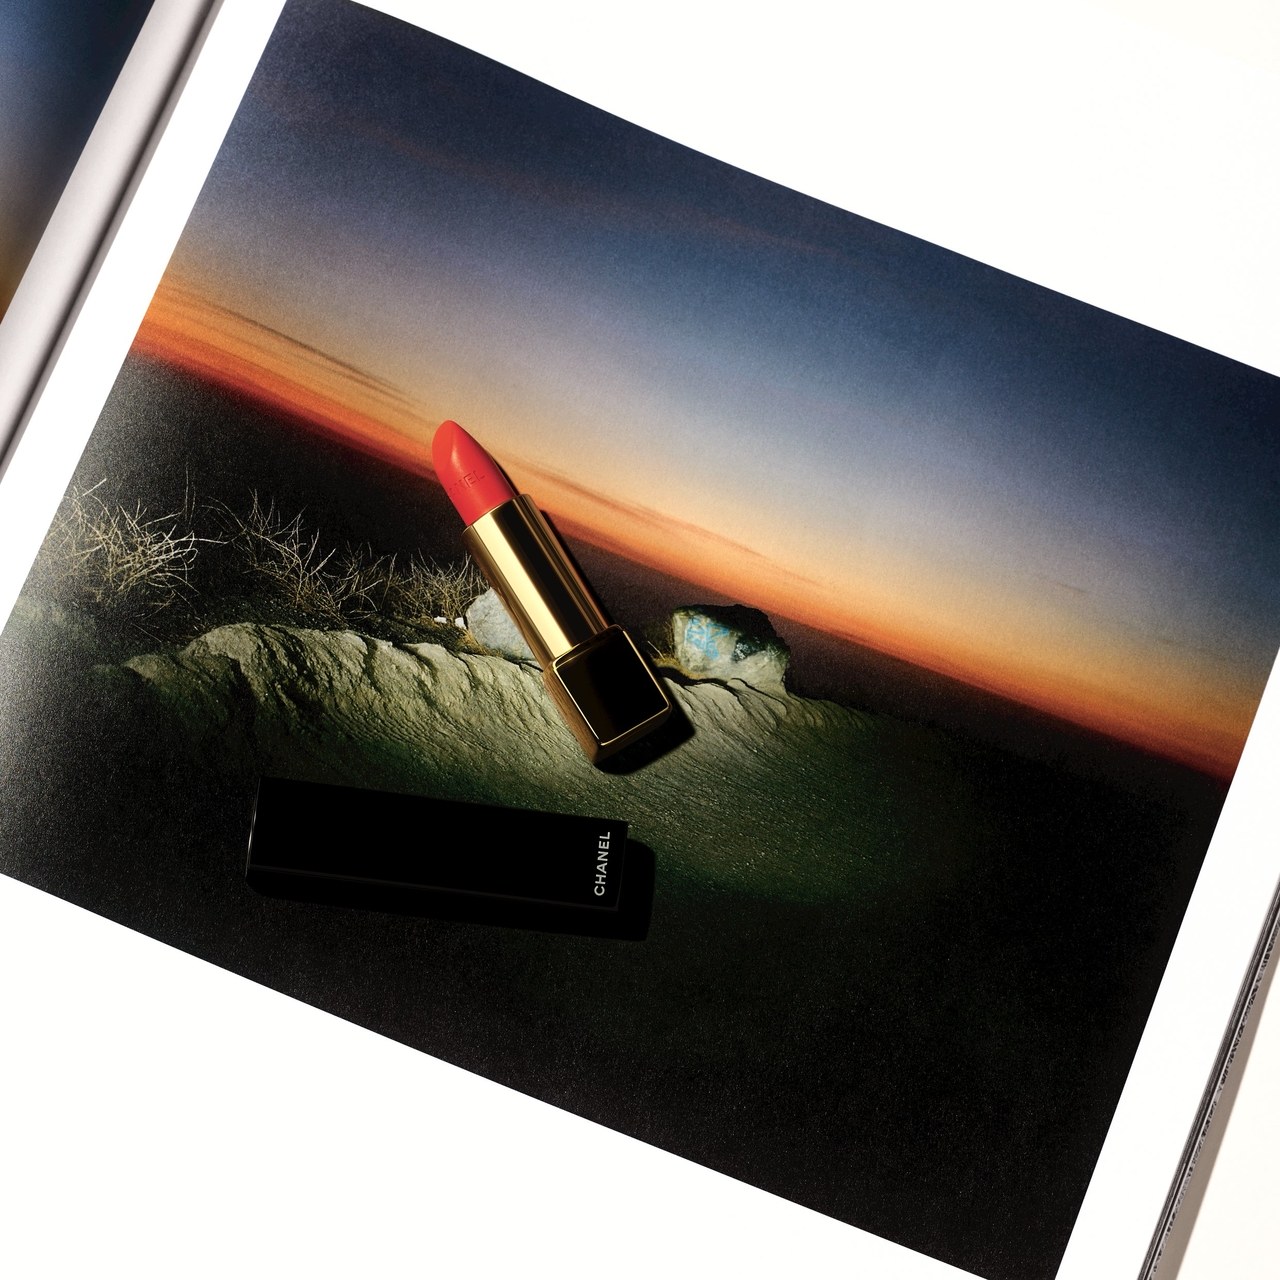 Chanel's First Light Lipstick & Max Farago's Photo of A Sunrise from His West Coast Road Trip with Lucia Pia.